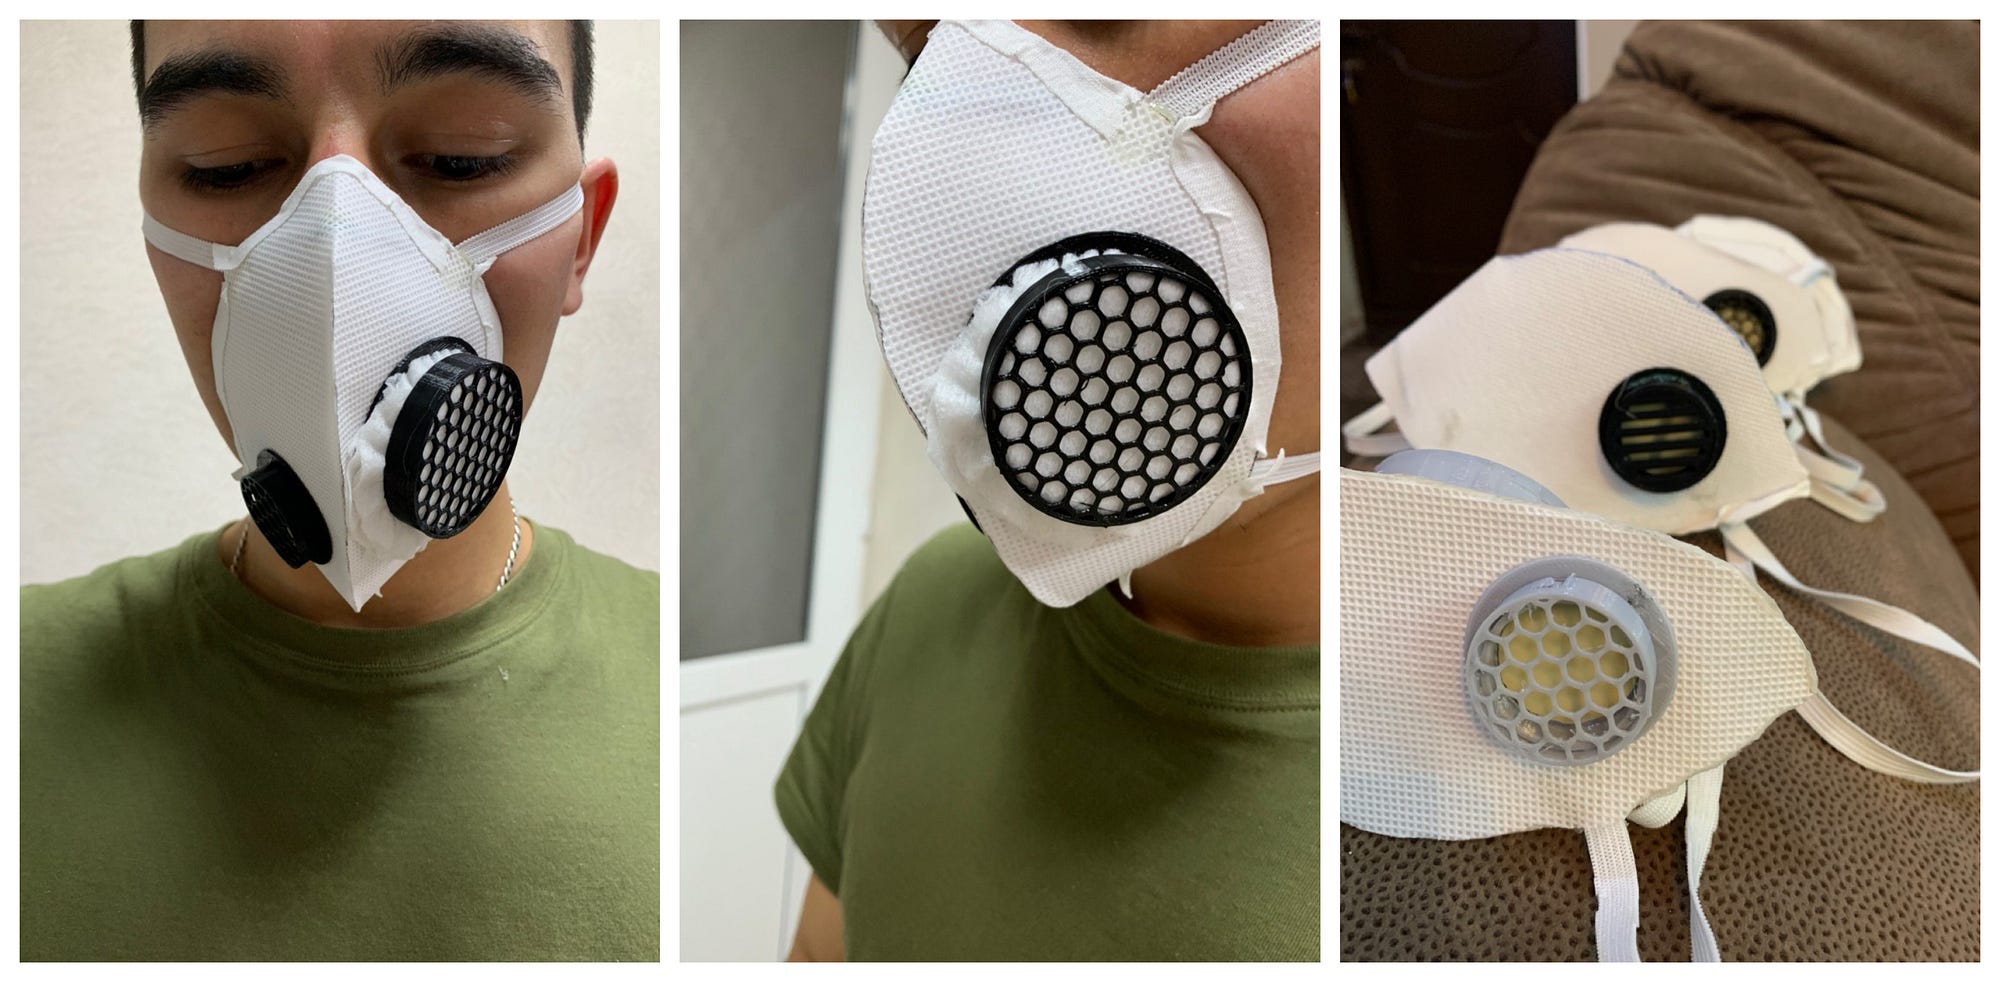 2020 Hot Reusable Protective Face Mask for LV Dust Masks for Louis